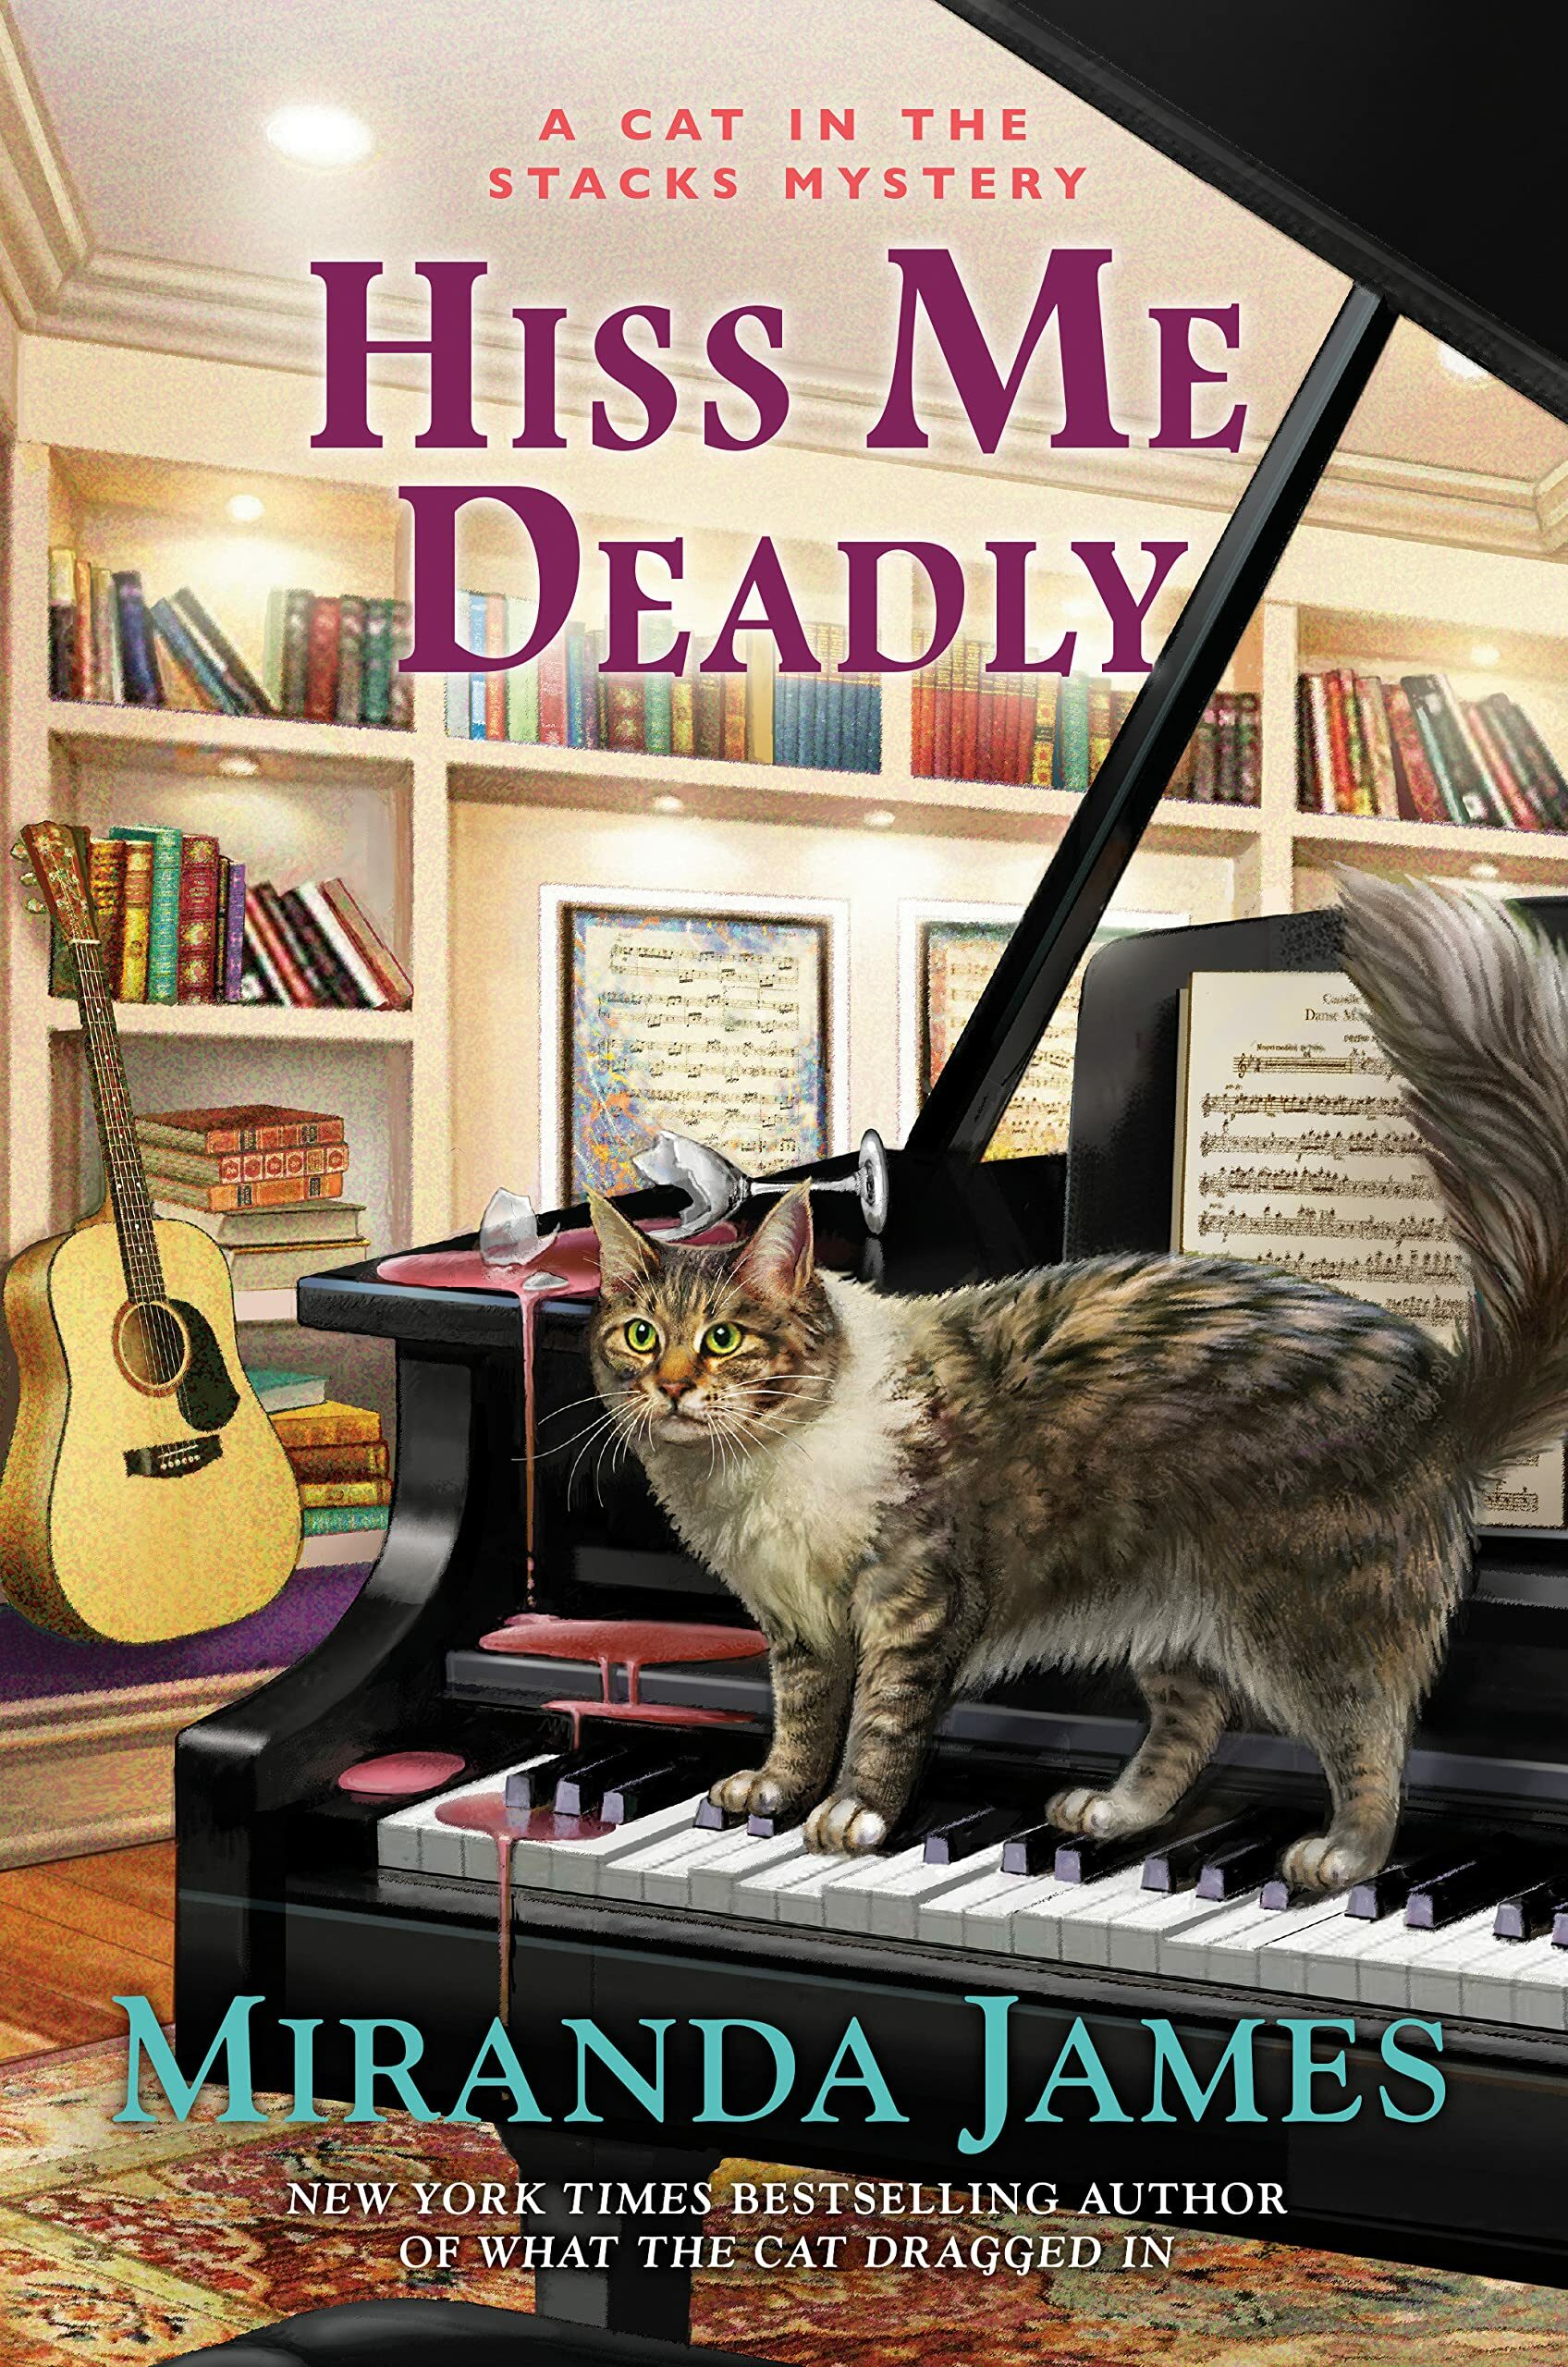 Hiss Me Deadly (Cat in the Stacks #15)